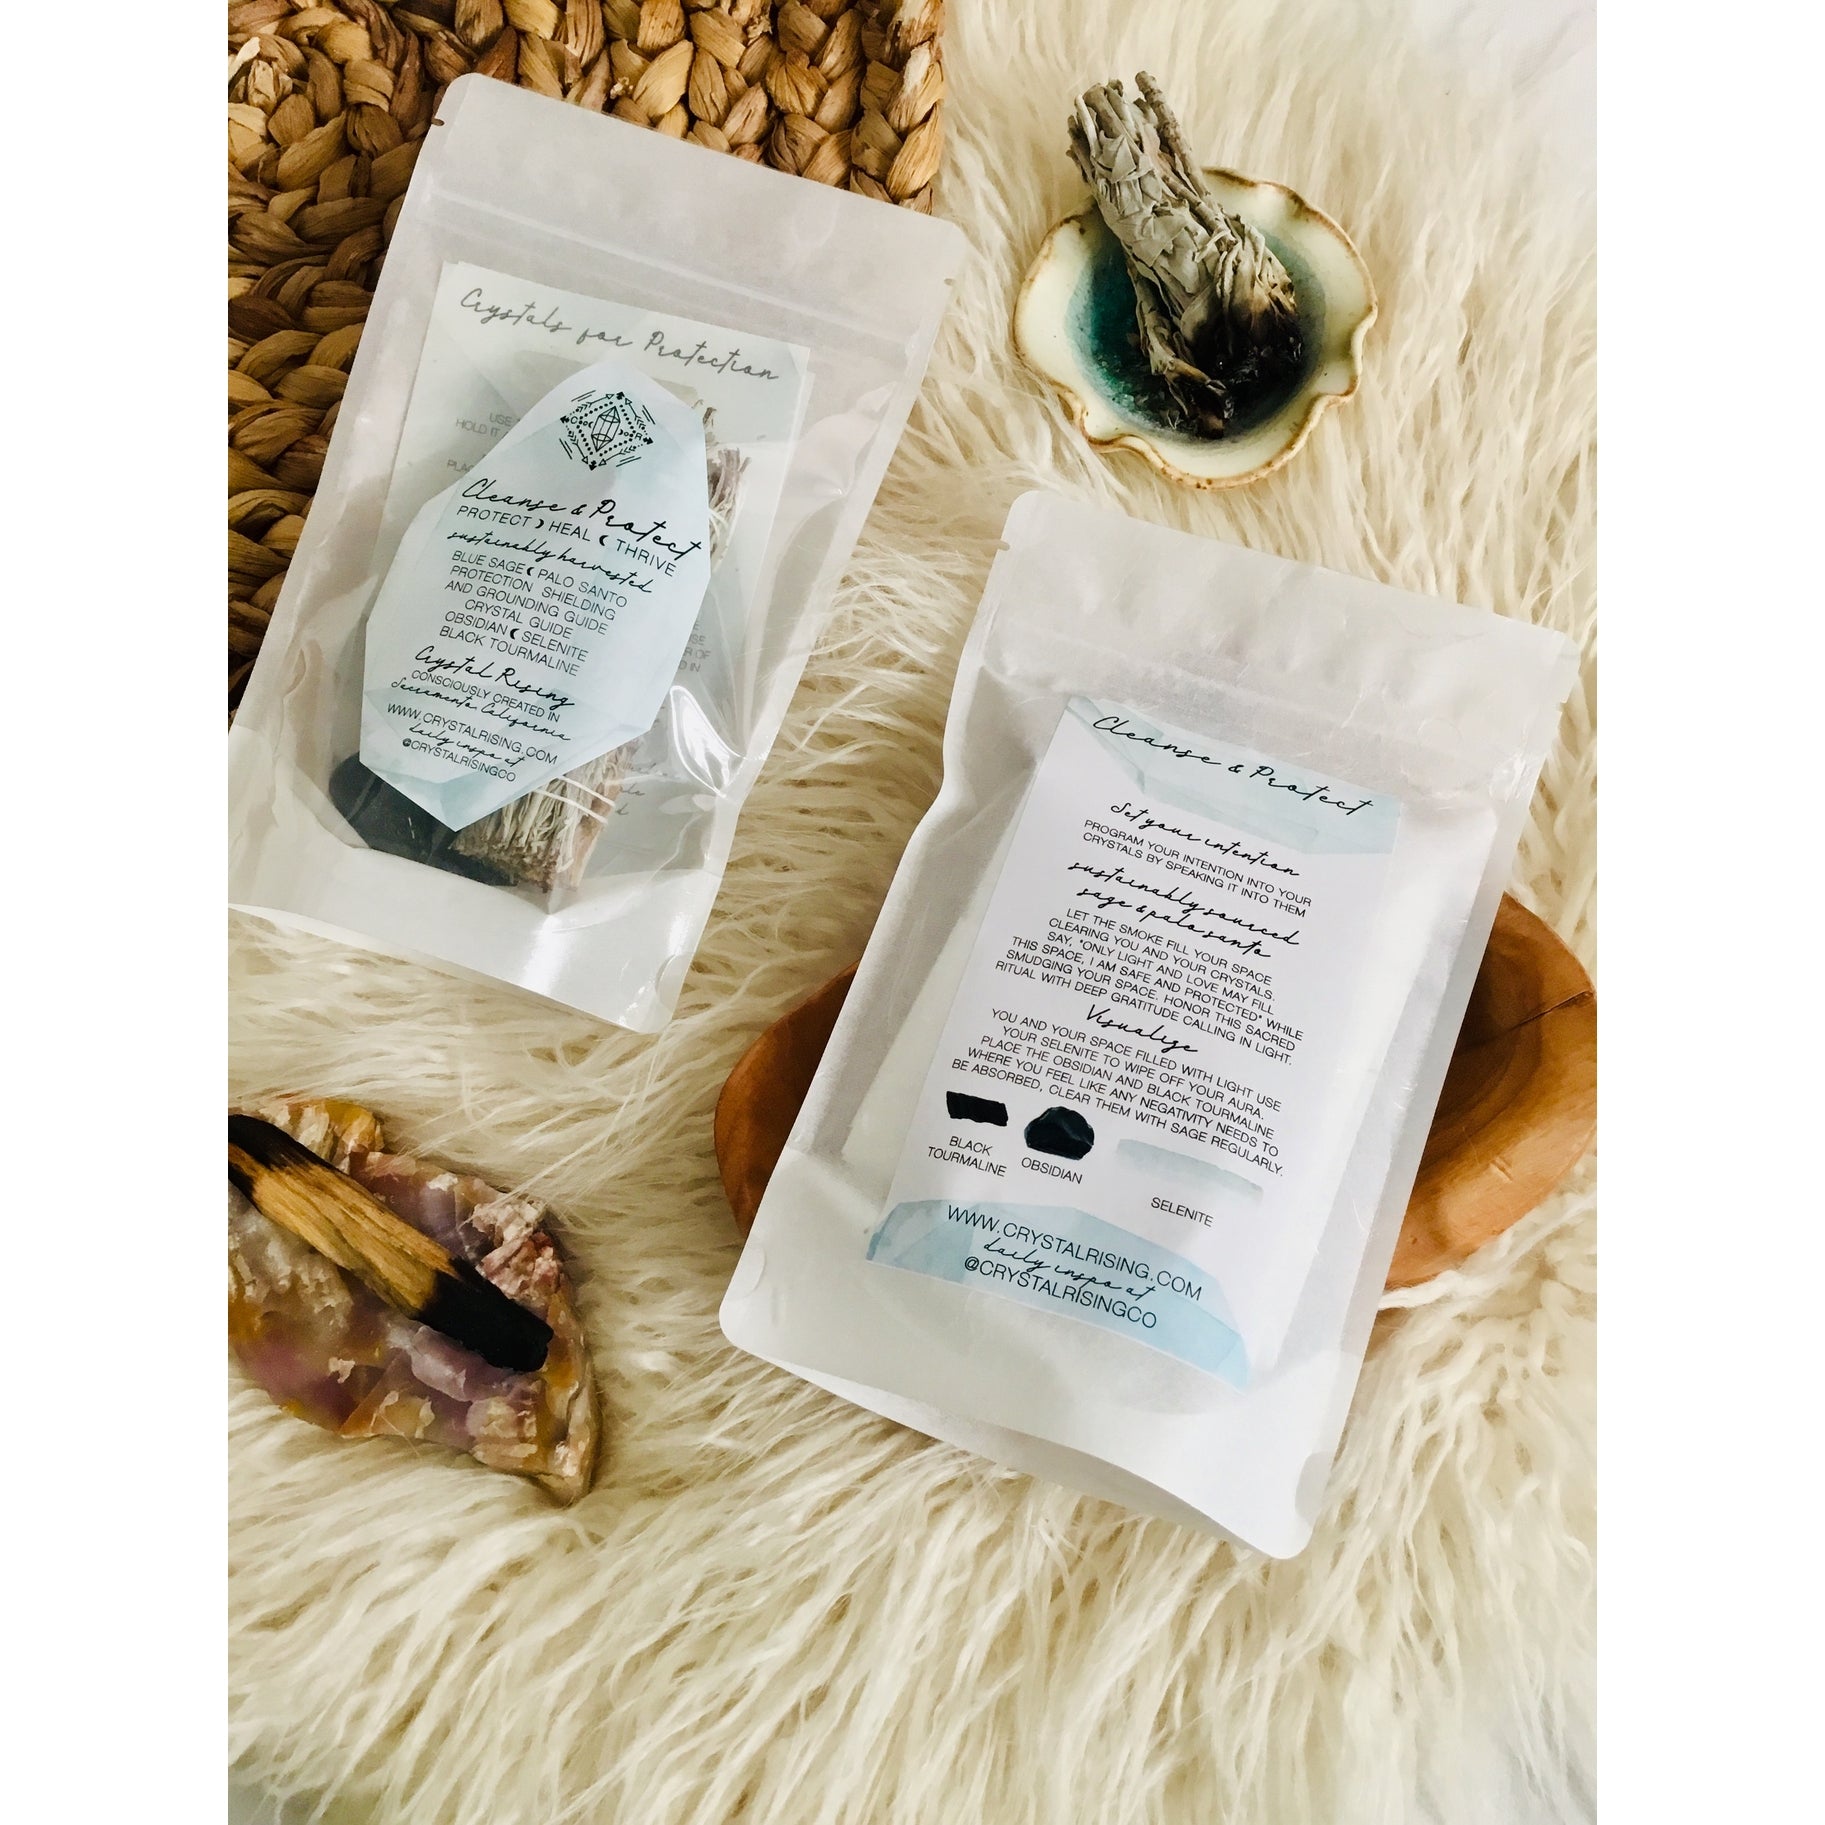 Cleanse and Protect Ritual Sage Kit